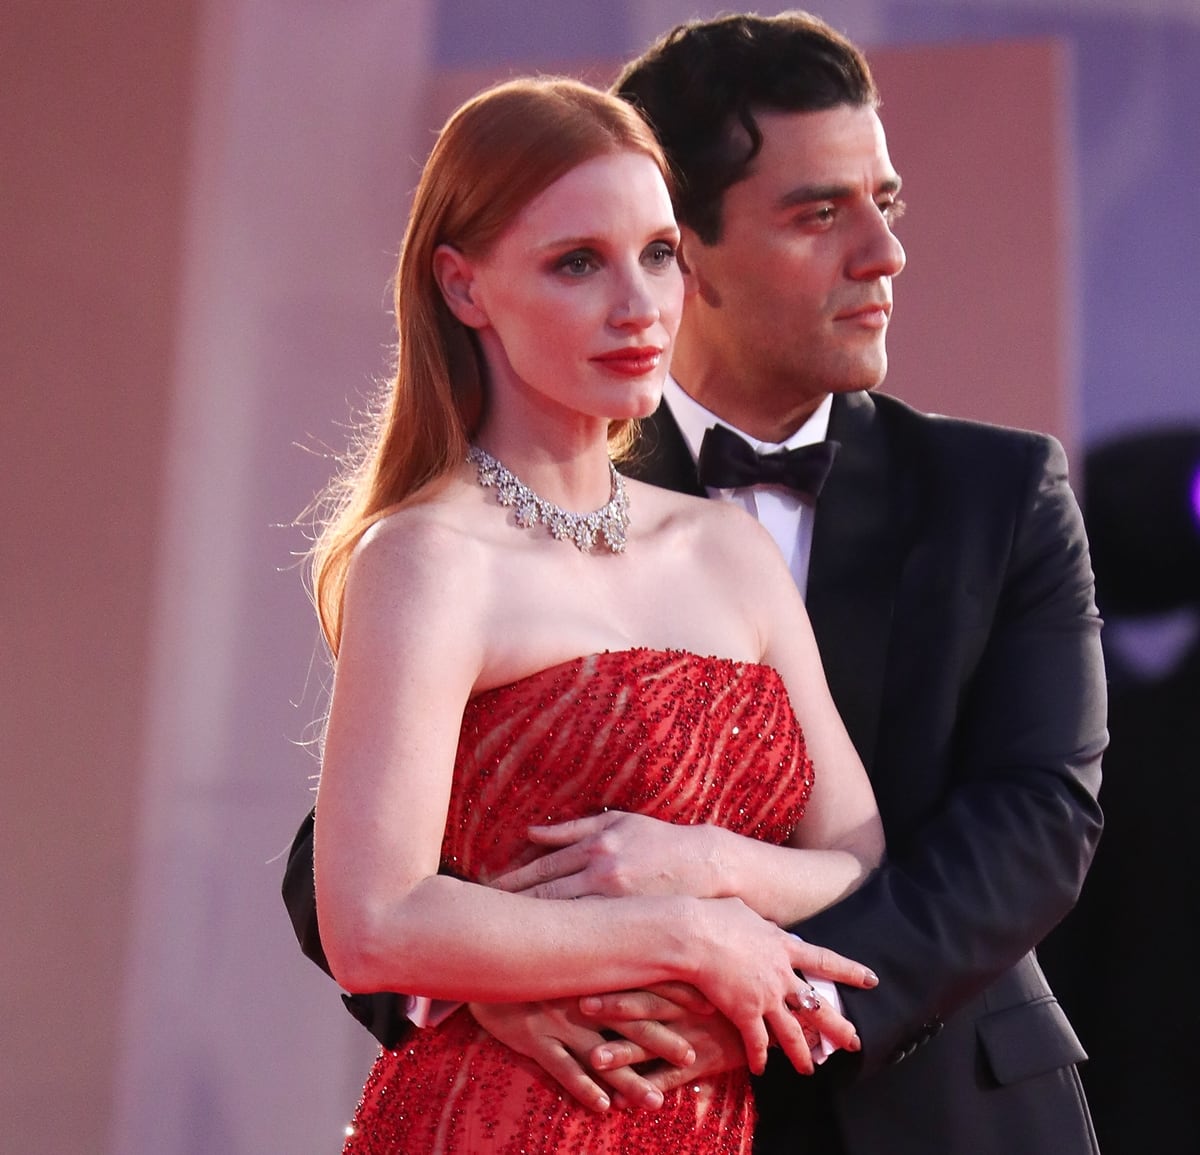 Jessica Chastain and Oscar Isaac with their arms wrapped around each other at the premiere of Scenes from a Marriage, which is a modern adaptation of Ingmar Bergman